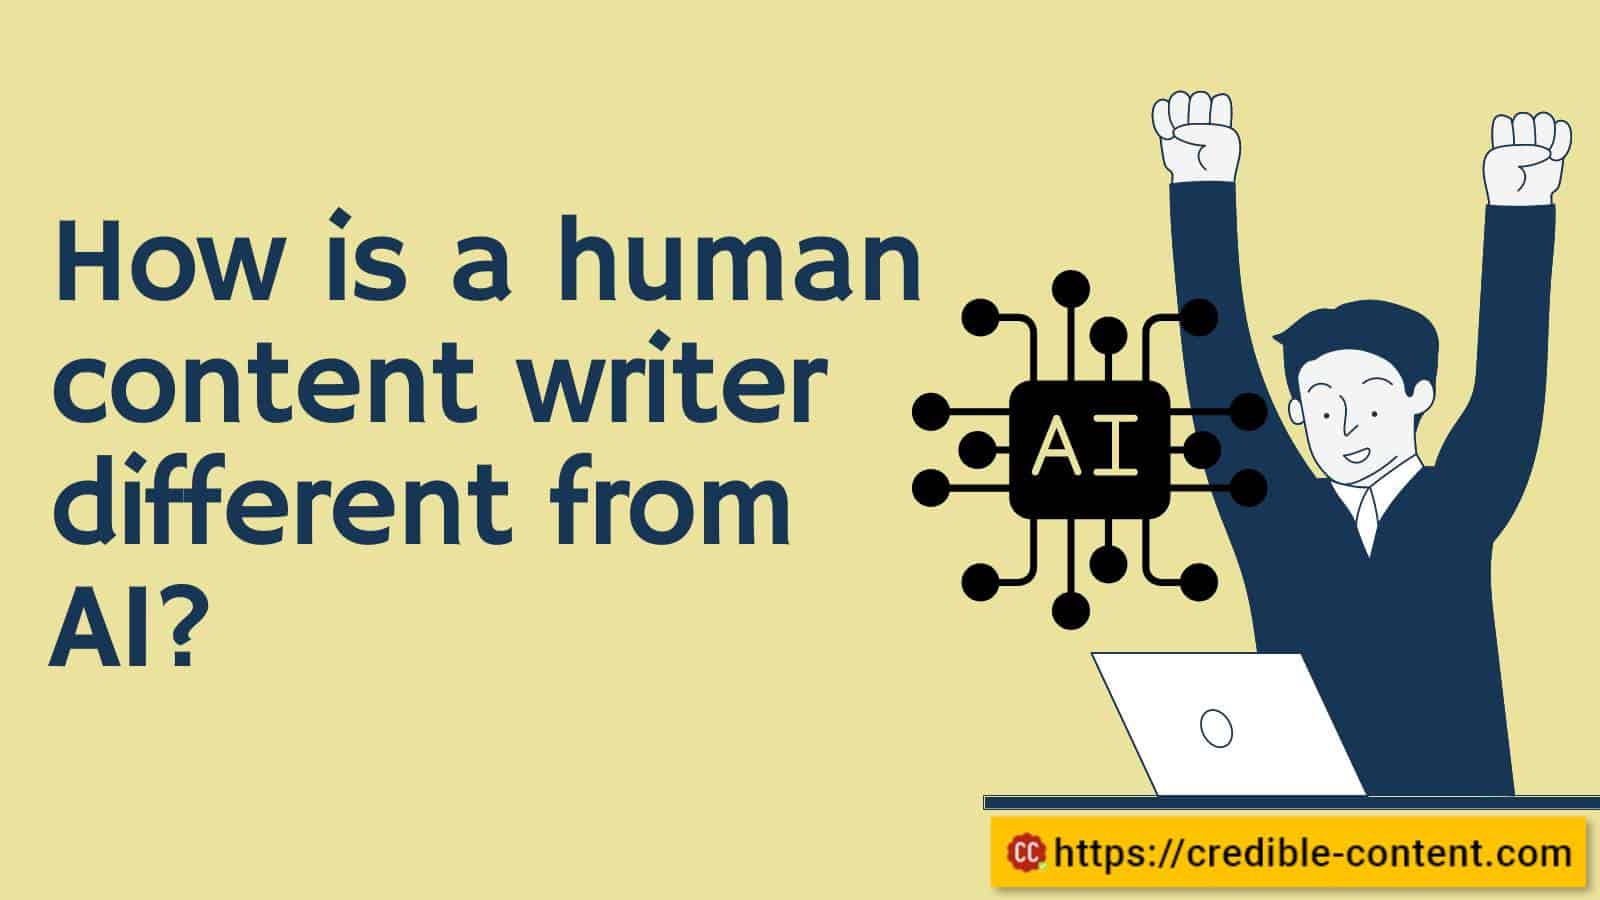 How is a human content writer different from AI